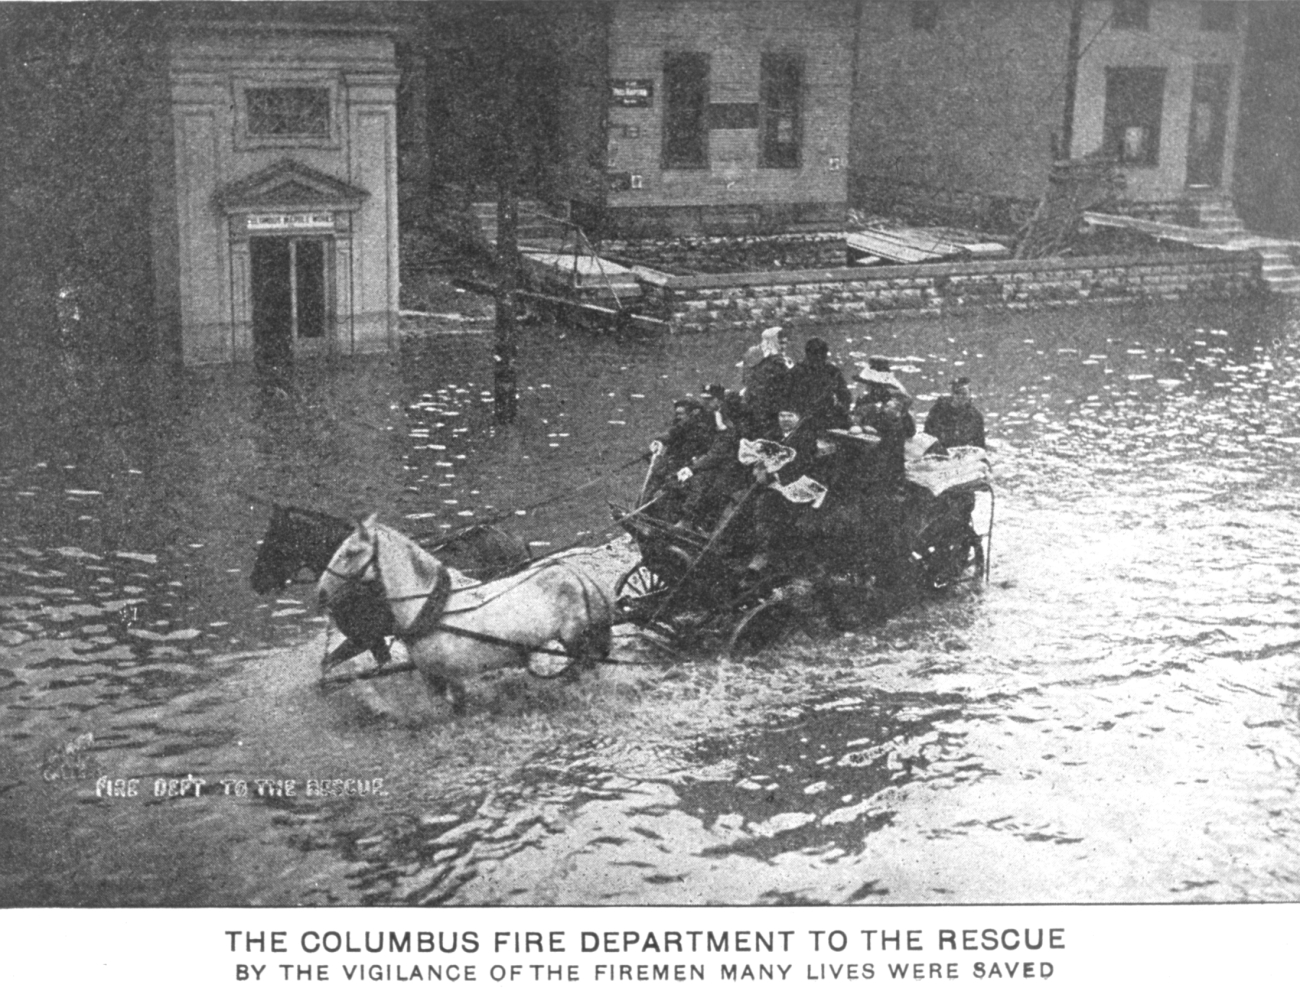 The Columbus fire department helped save many stranded people